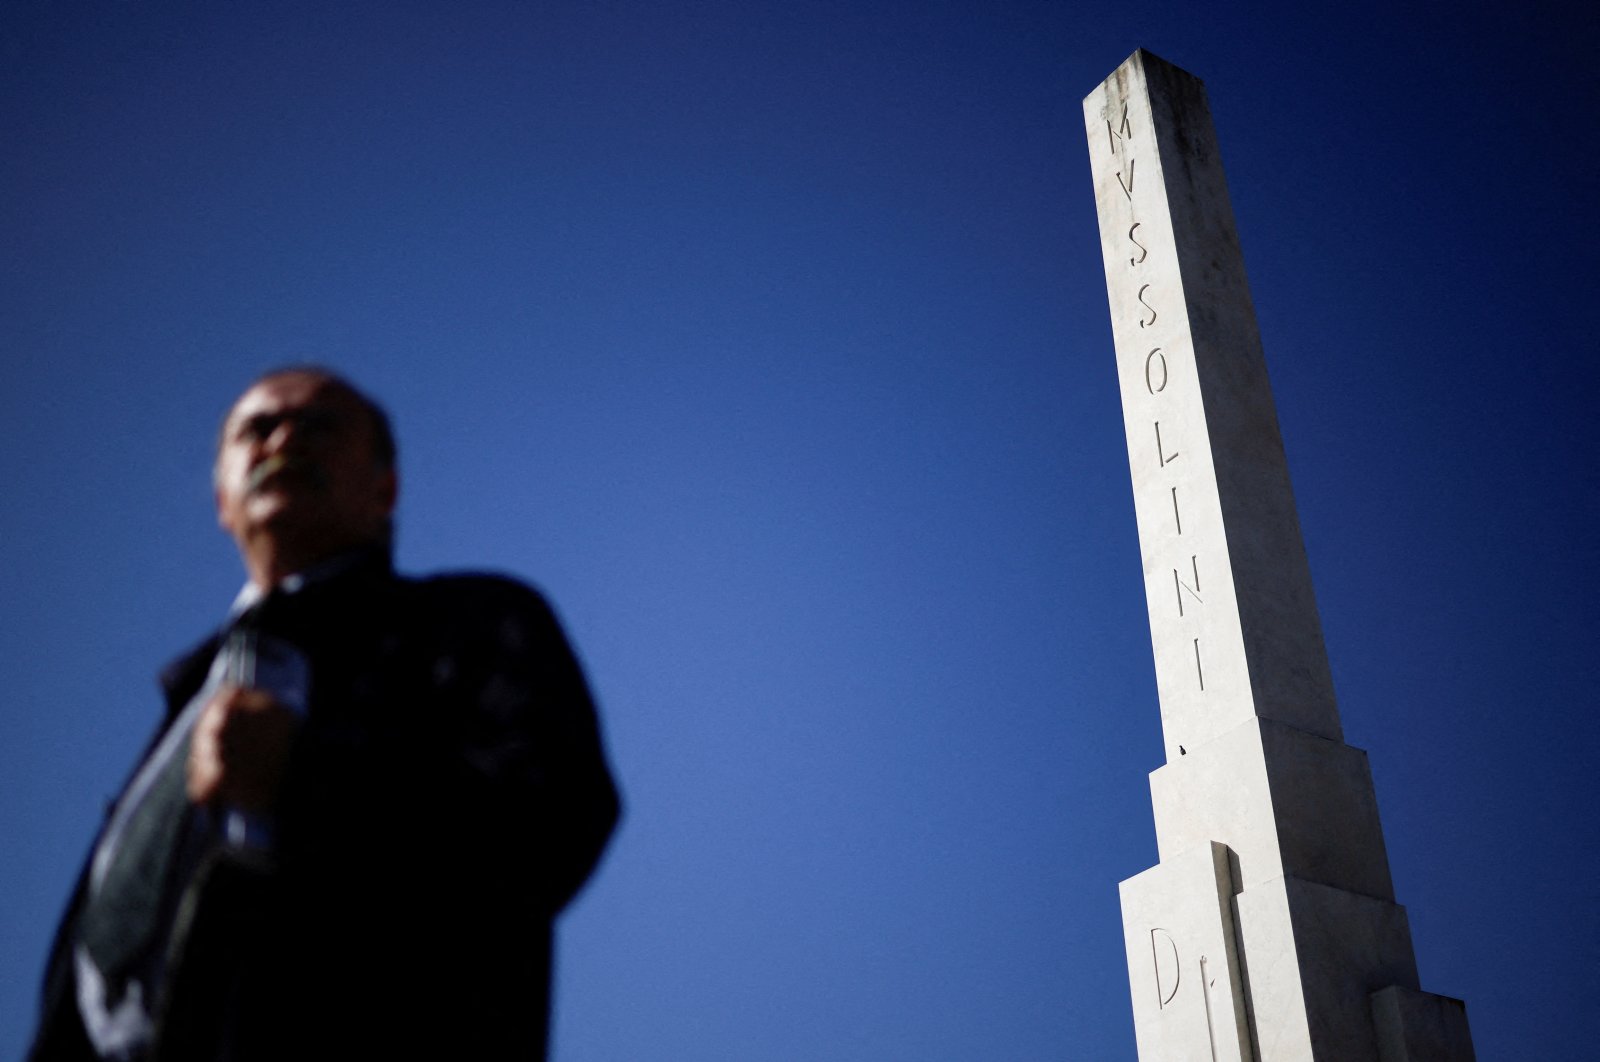 A man walks past an obelisk dedicated to fascist leader Benito Mussolini in Rome, Italy, Oct. 19, 2022. (Reuters Photo)